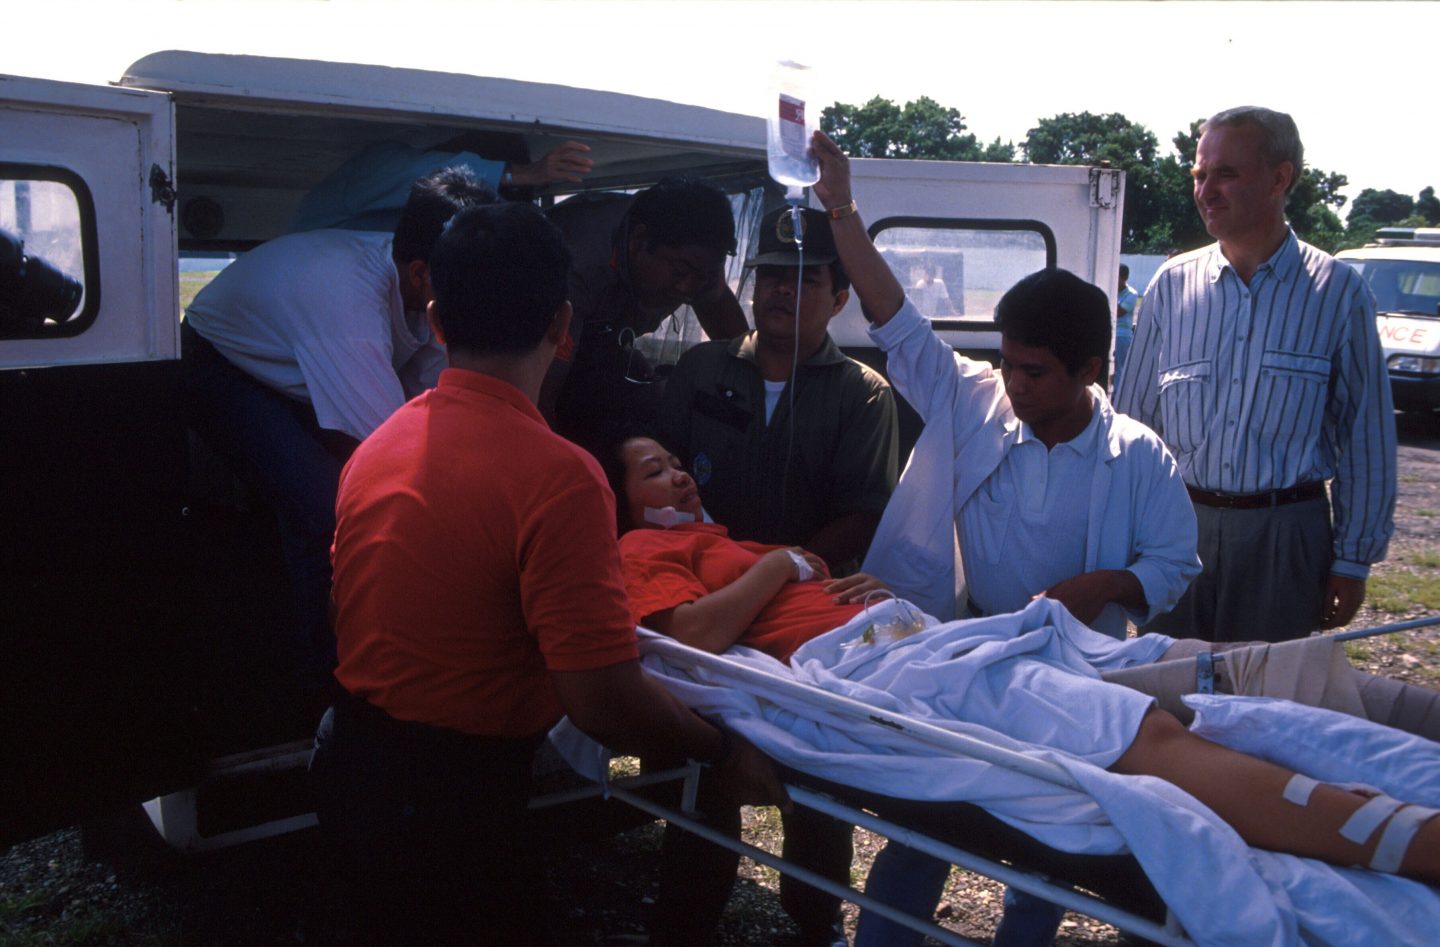 One of the over 30 victims of the 1991 terrorist attack at a public Doulos presentation being wheeled away by medics.